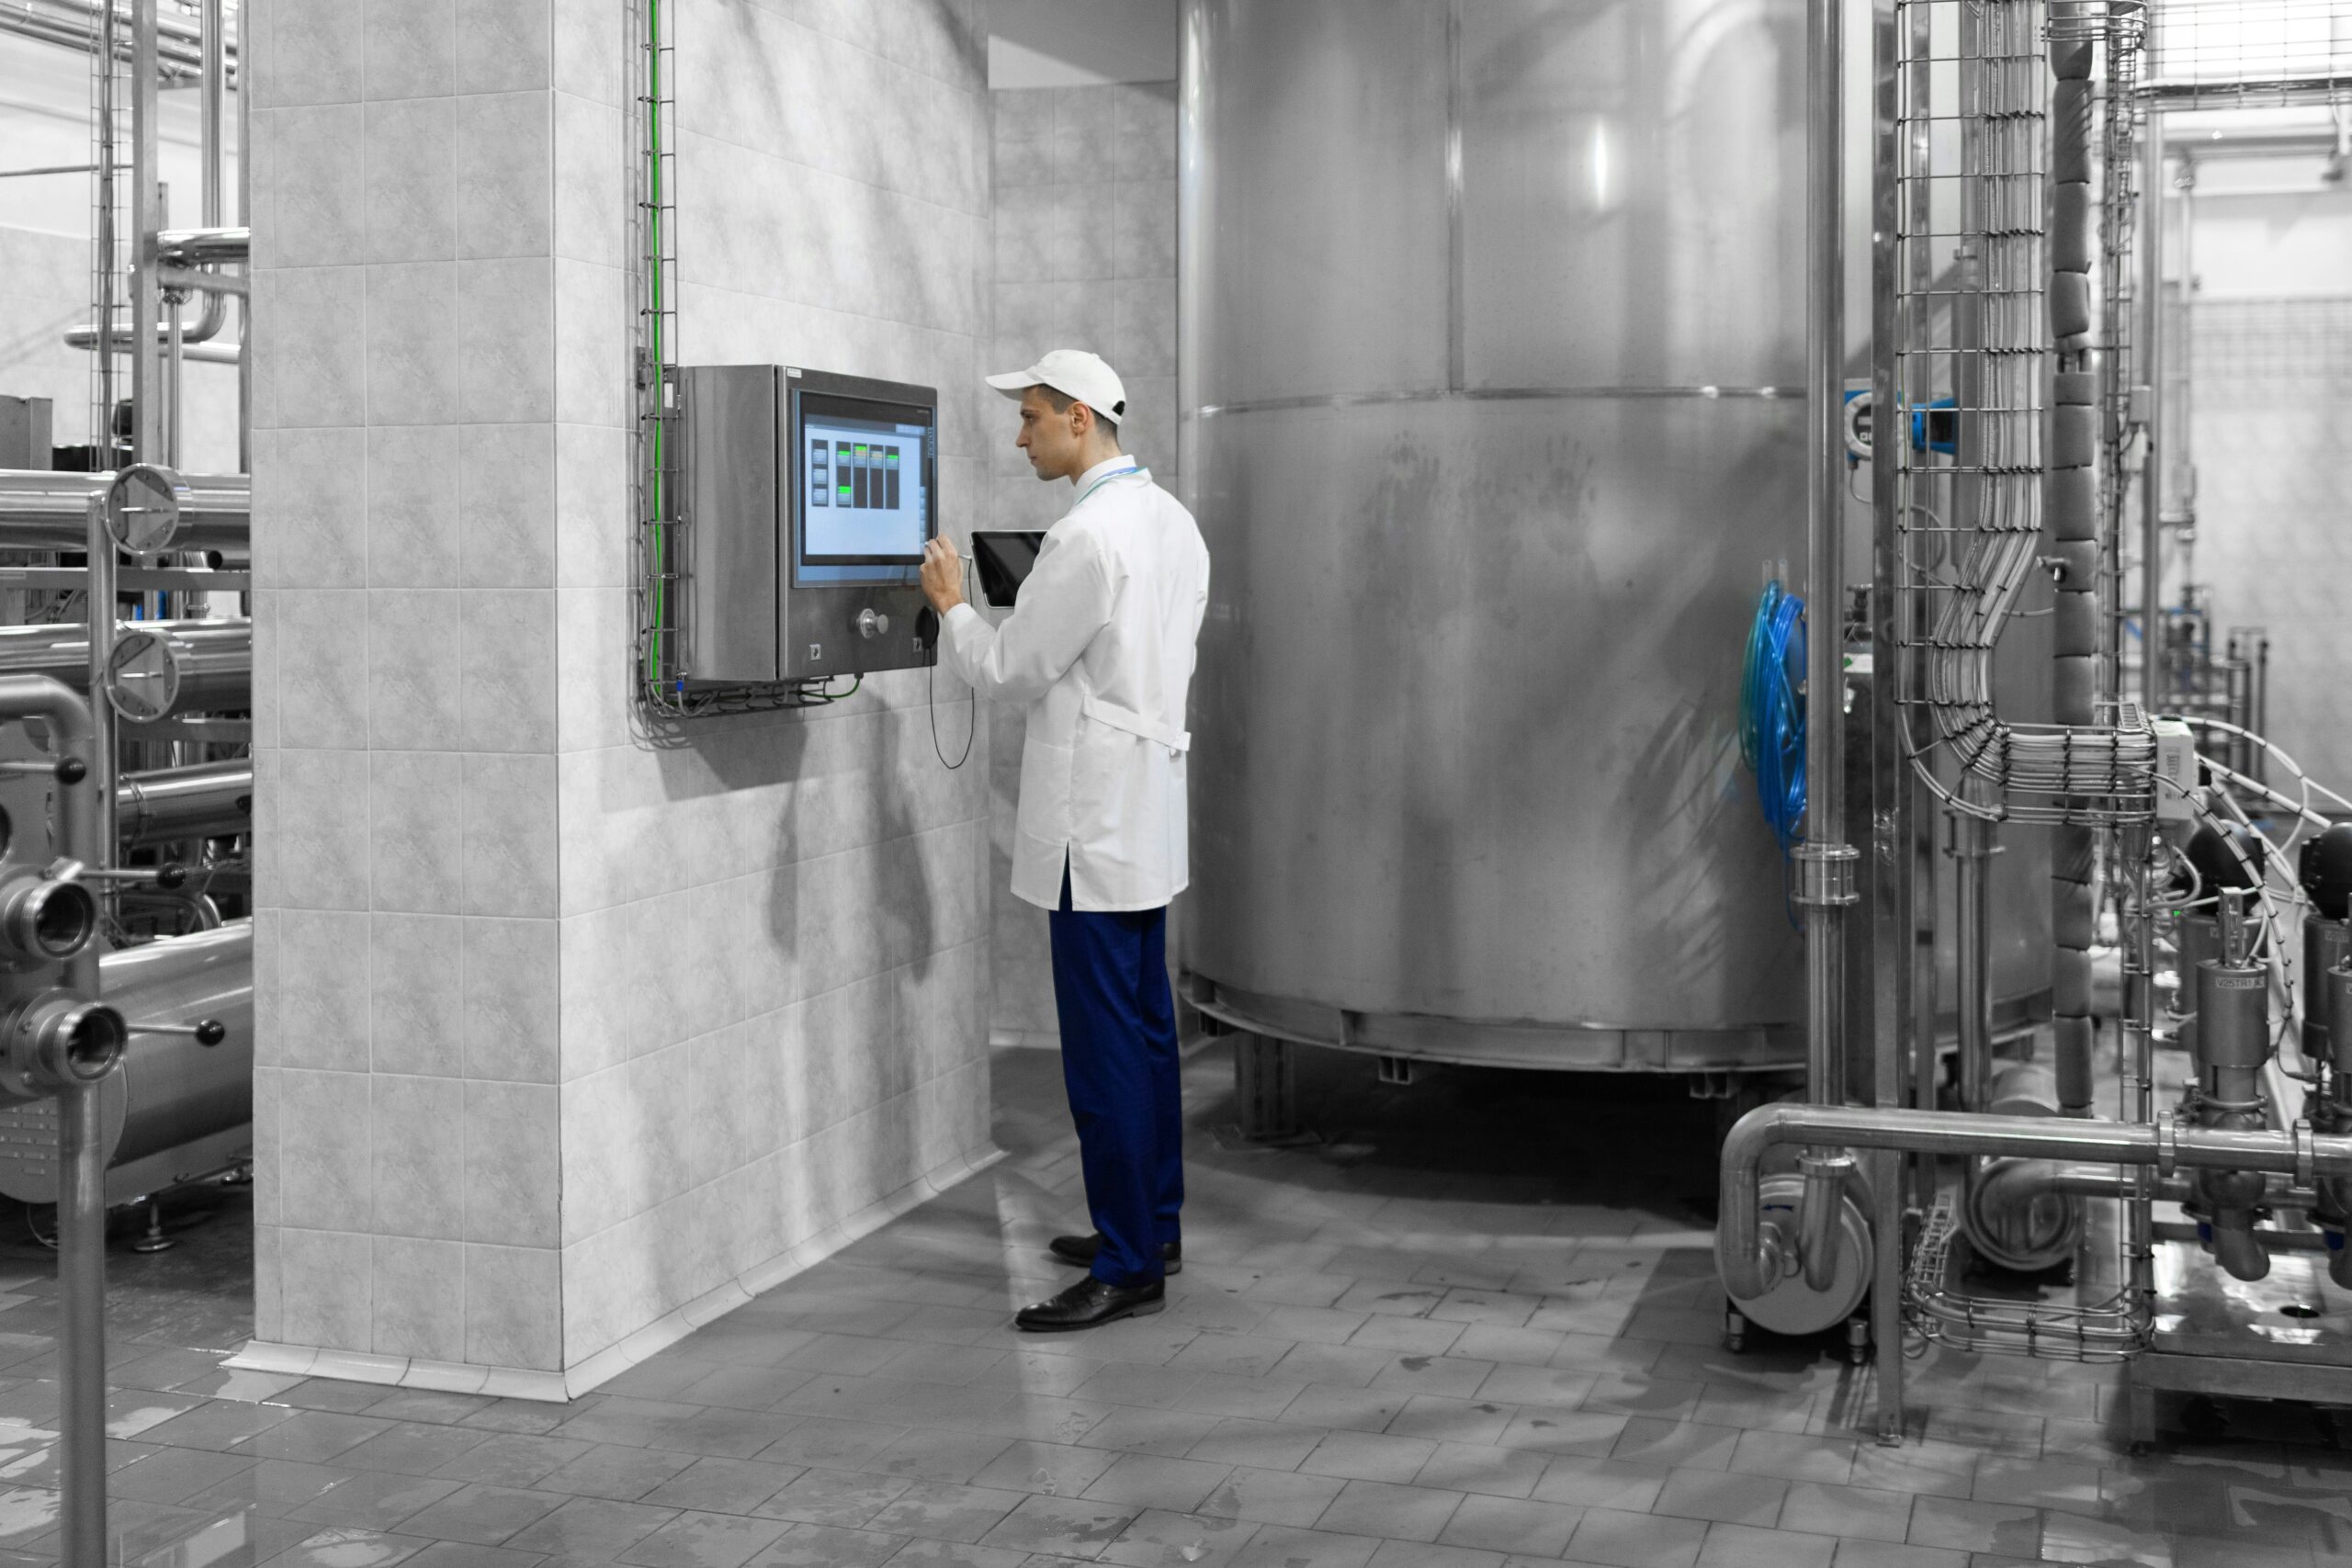 Worker in white lab coat using a digital screen on a metal box in an industrial room of equiptment.